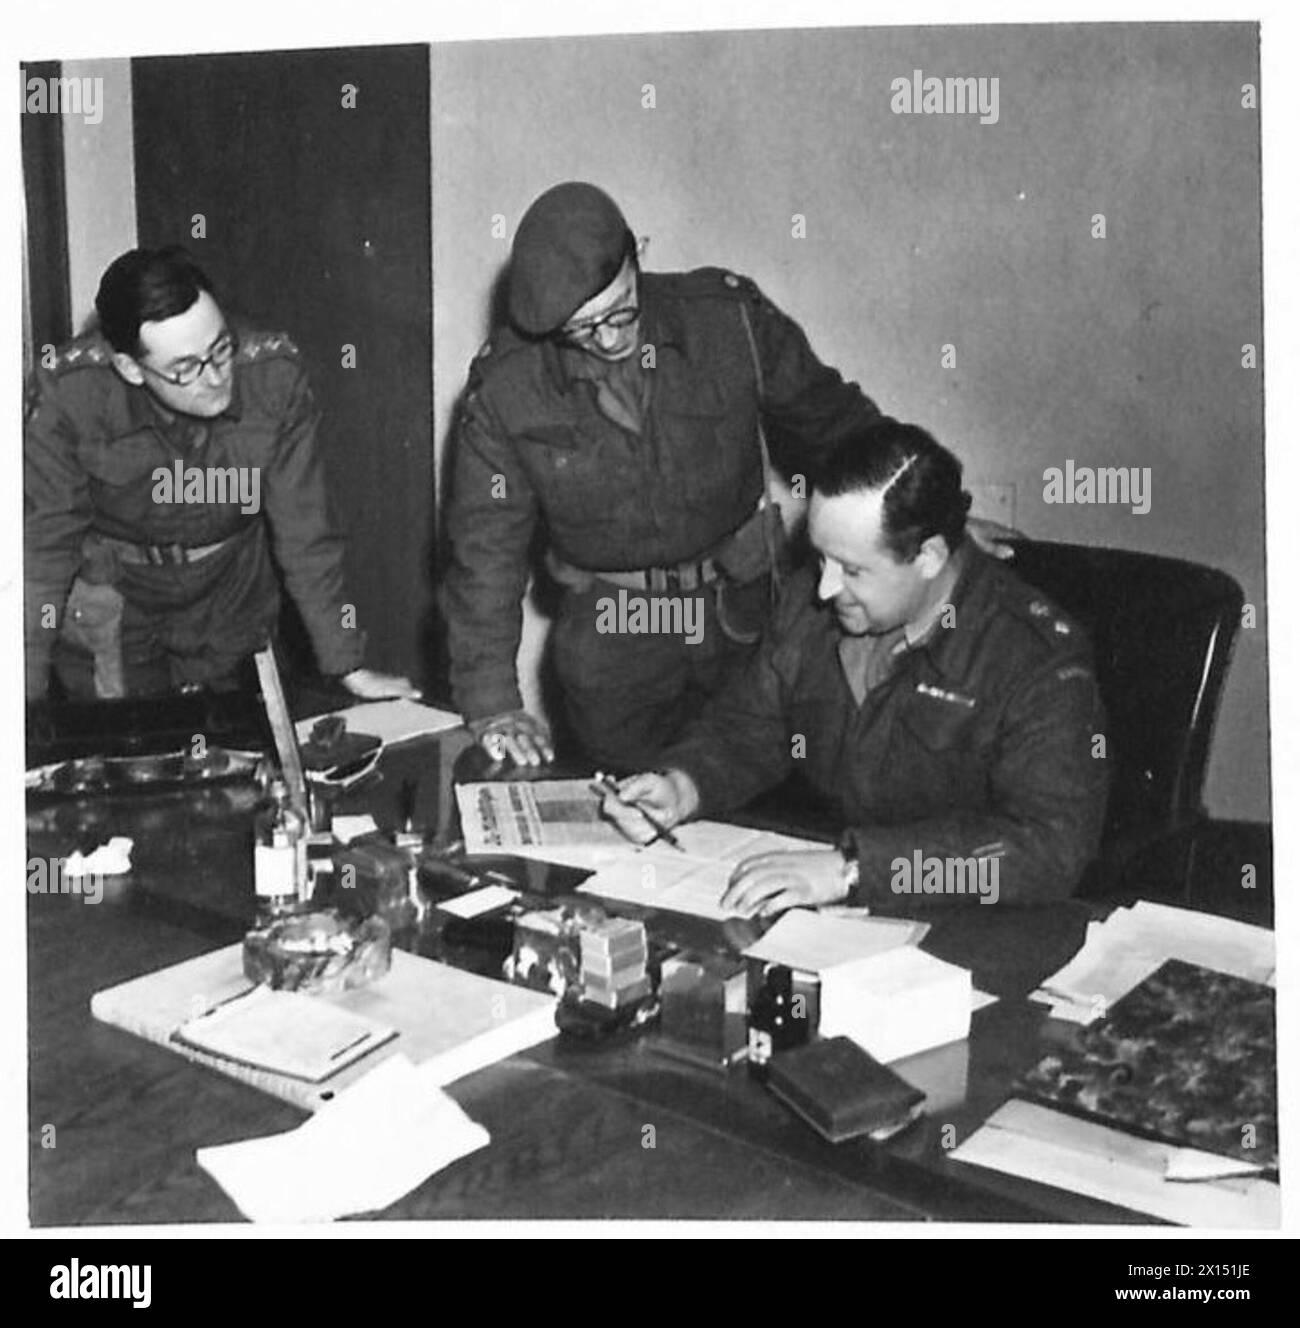 'REICHSENDER HAMBURG' NOW OPERATED BY THE BRITISH - Lieutenant Colonel P. Lieven, MC., of the Canadian Army, O.C. of No.4 Information Control Unit and head of the station, discusses programmed with his chief engineer Major Findley and Capt. C.R. Buxton his Radio Press Officer, at a conference British Army, 21st Army Group Stock Photo